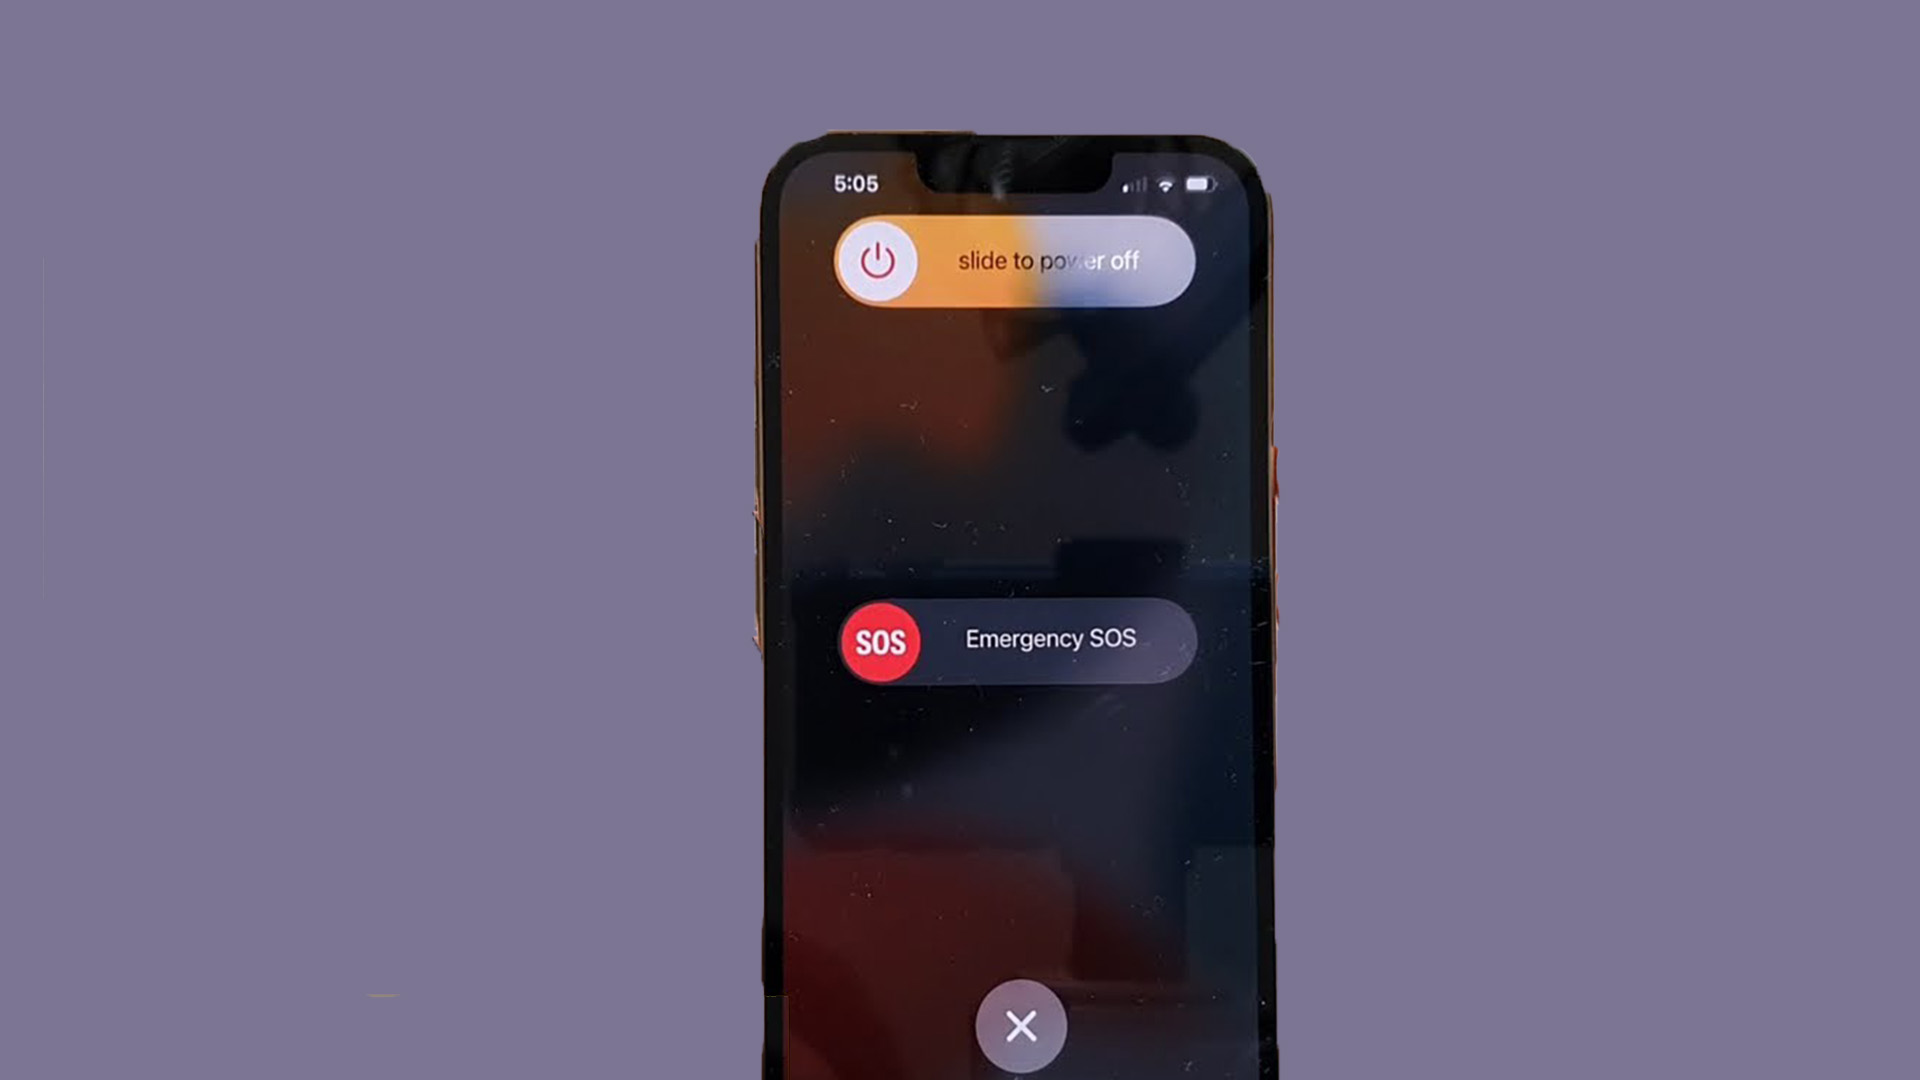 move the power slider to power your iPhone off